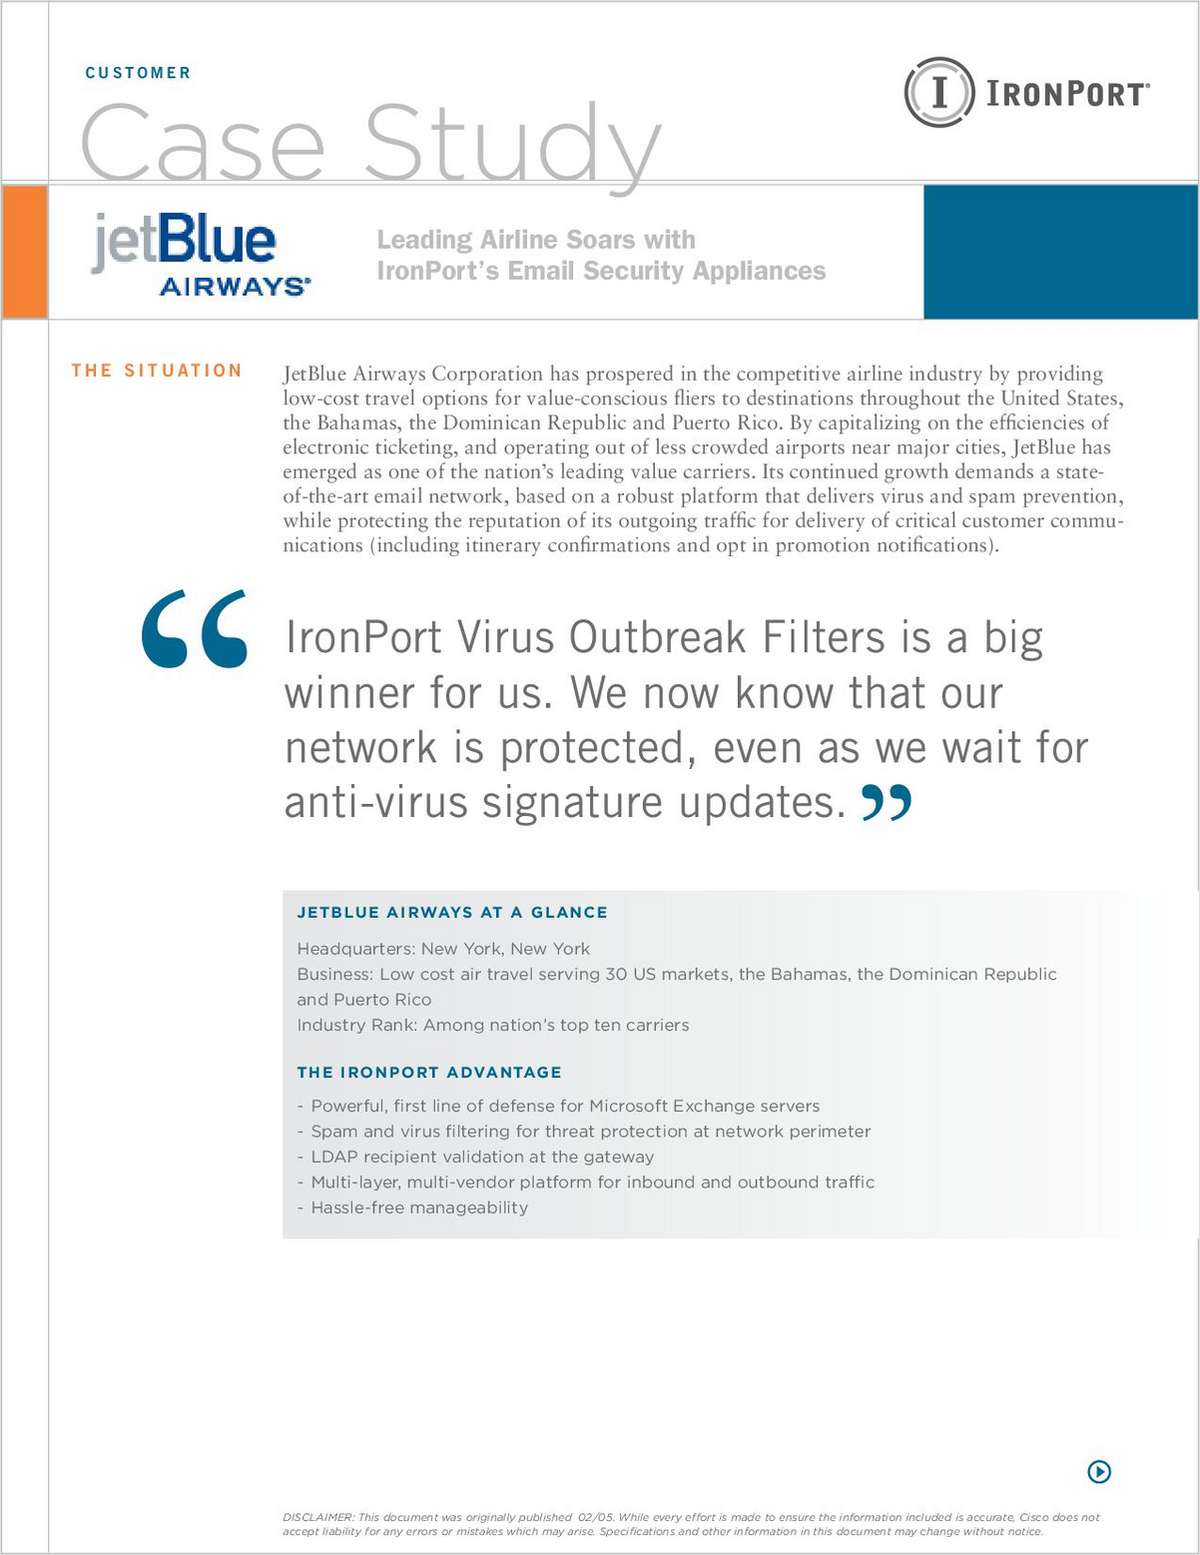 Leading Airline Soars with IronPort's Email Security Appliances – JetBlue Case Study